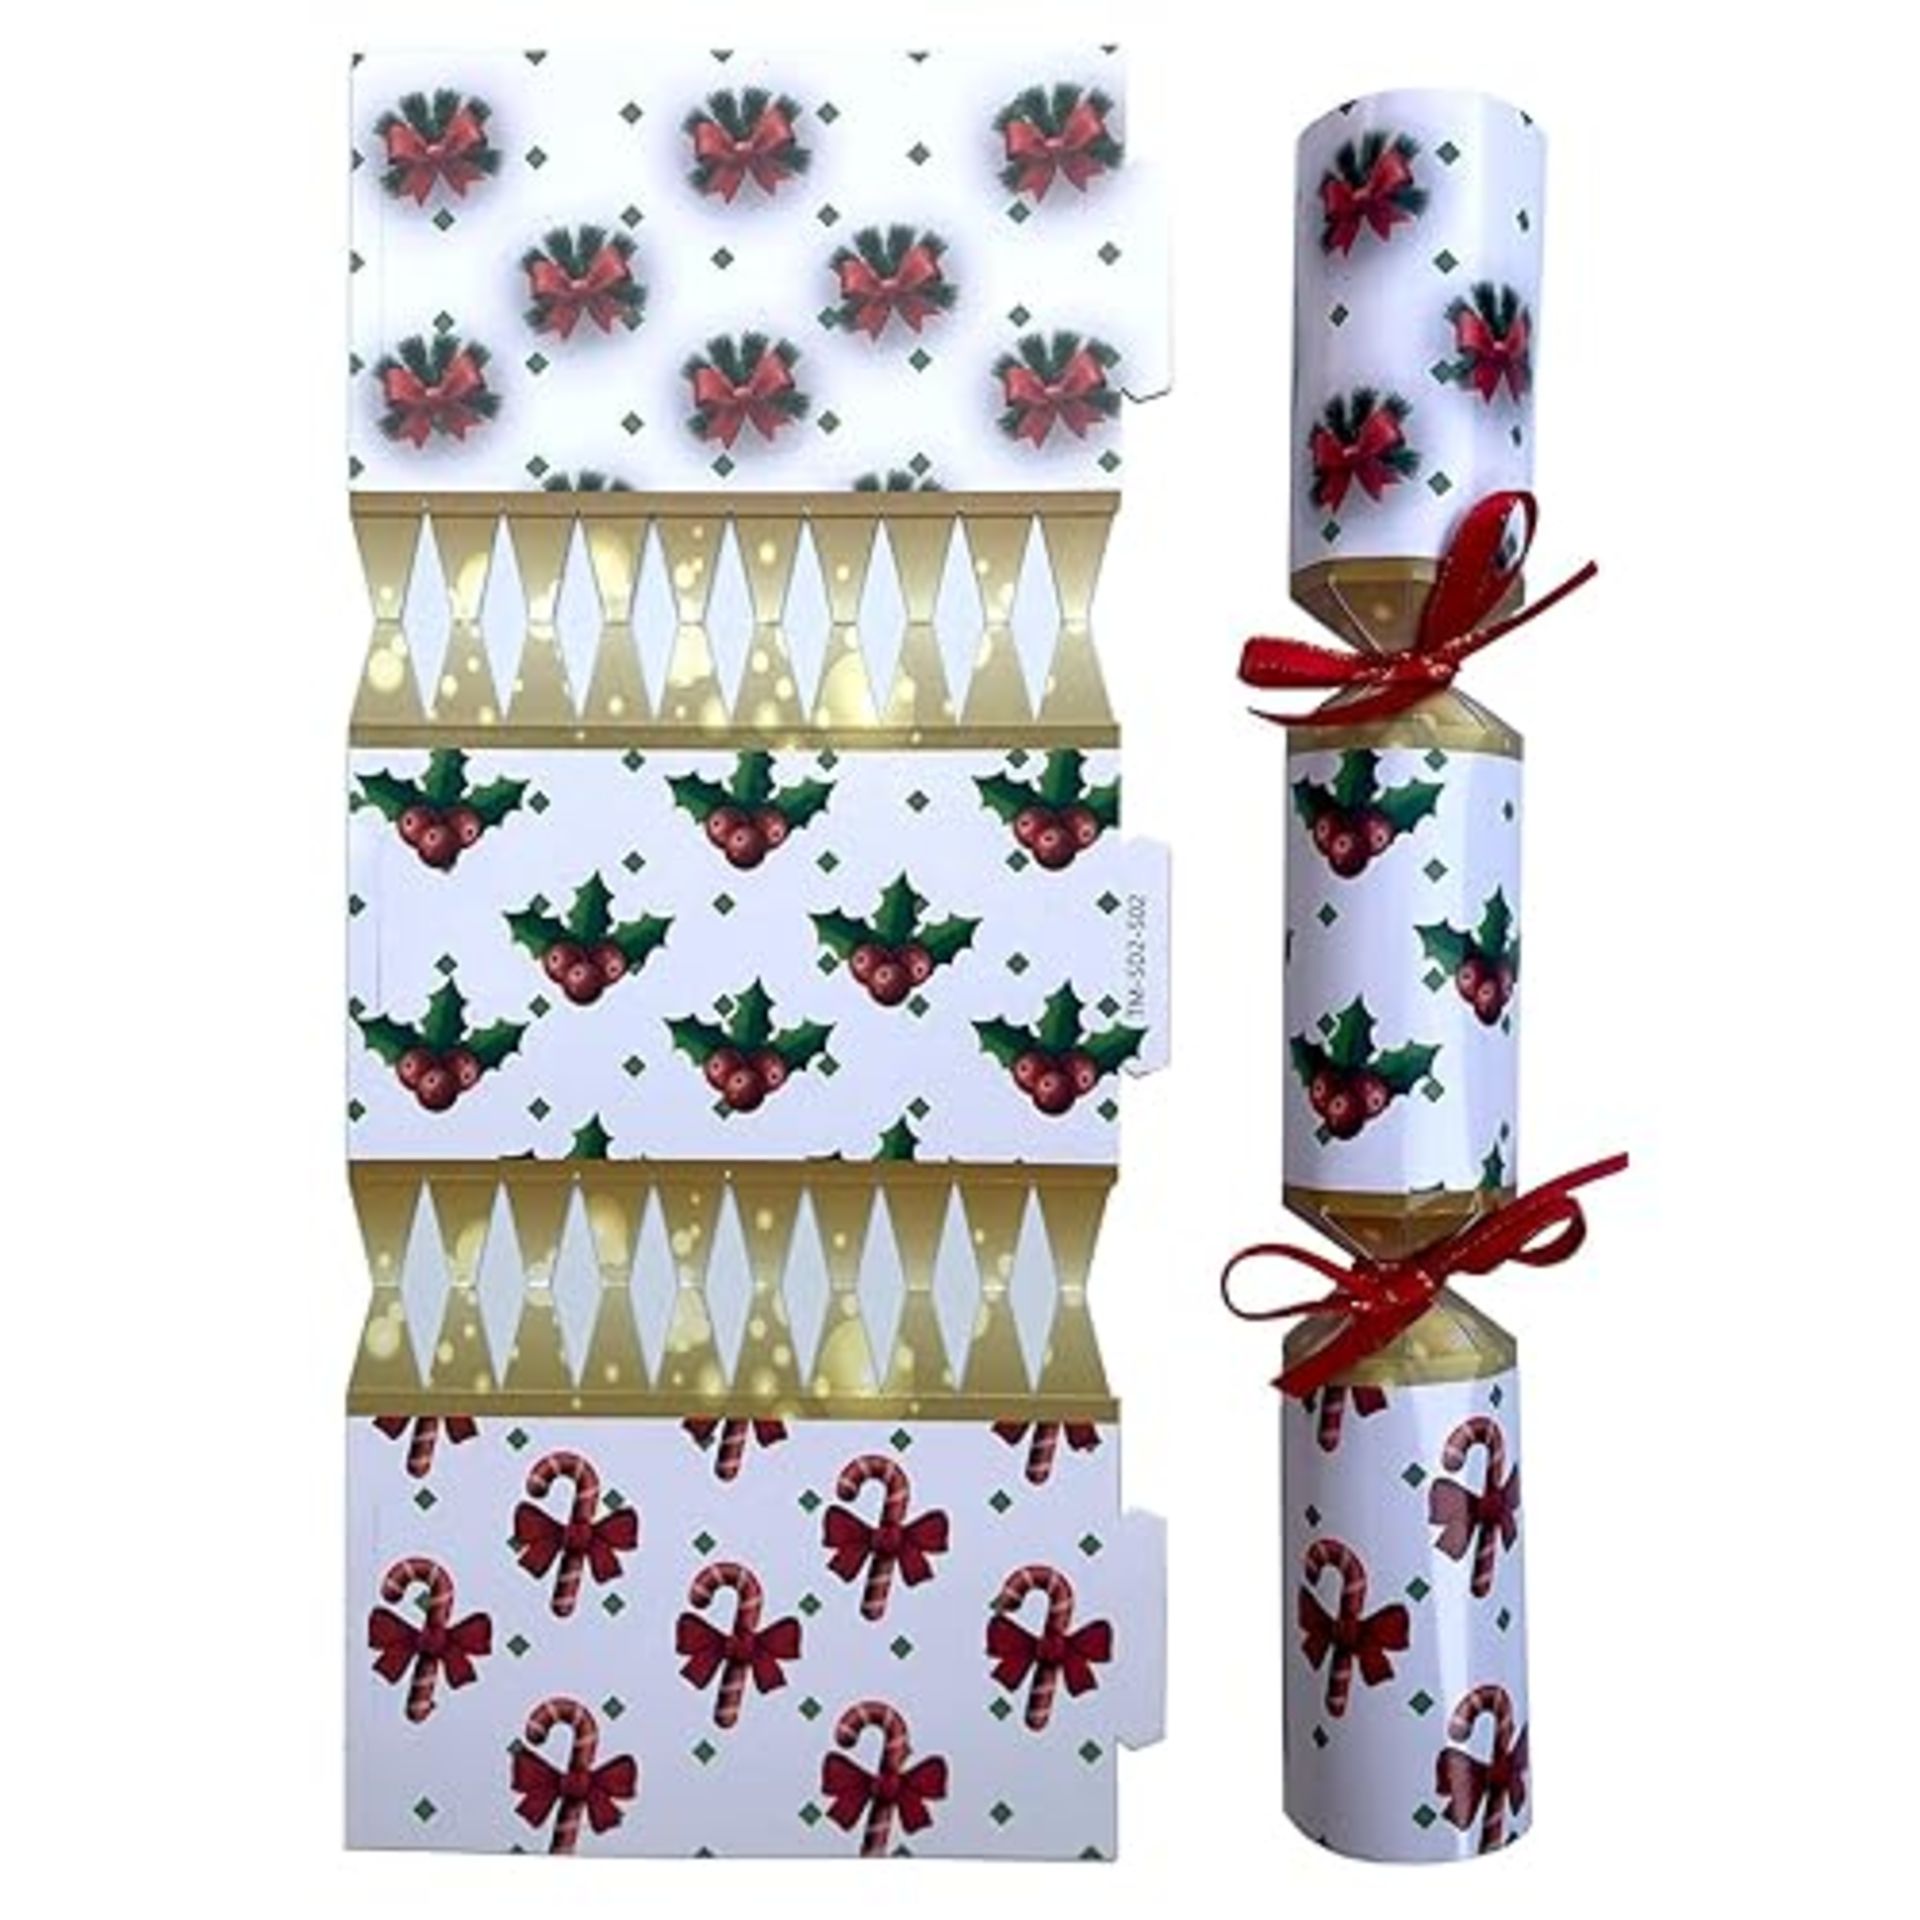 ToSSme 10 luxury crackers and 5 candy bags.by DIY Make and Fill Your Own Festive Seasonal Christmas